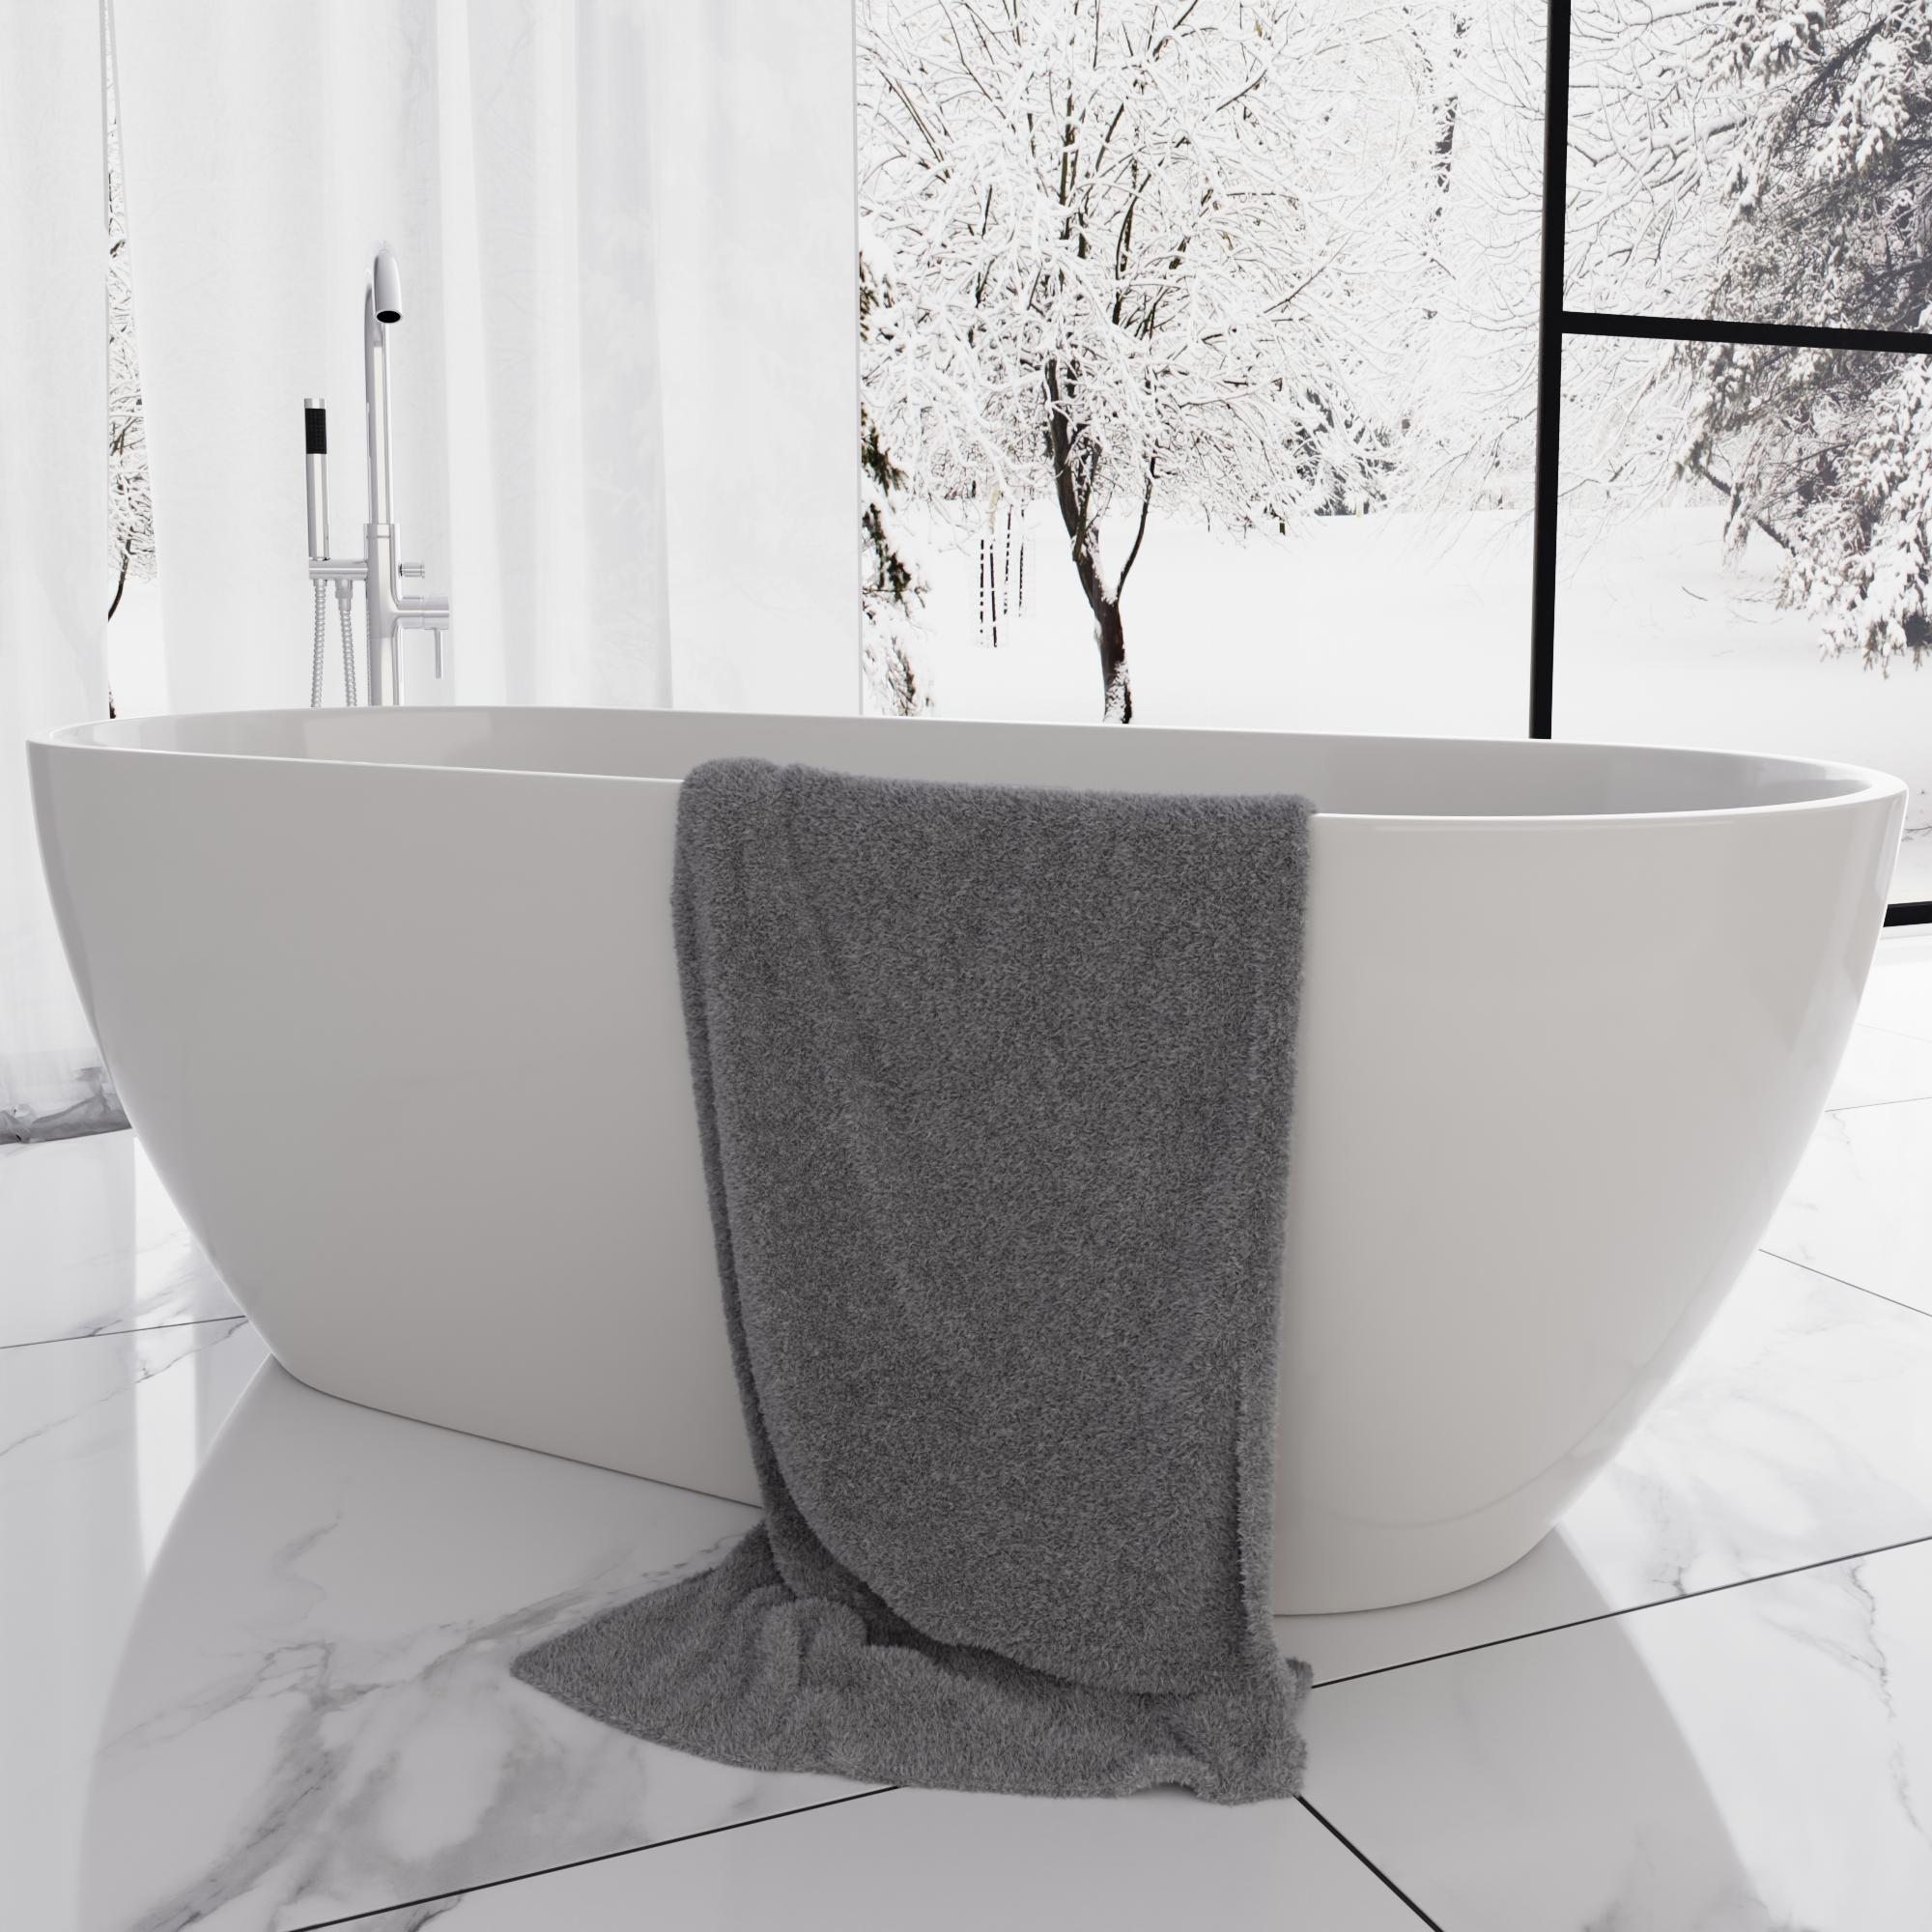 Winter landscape bathroom with snowy background